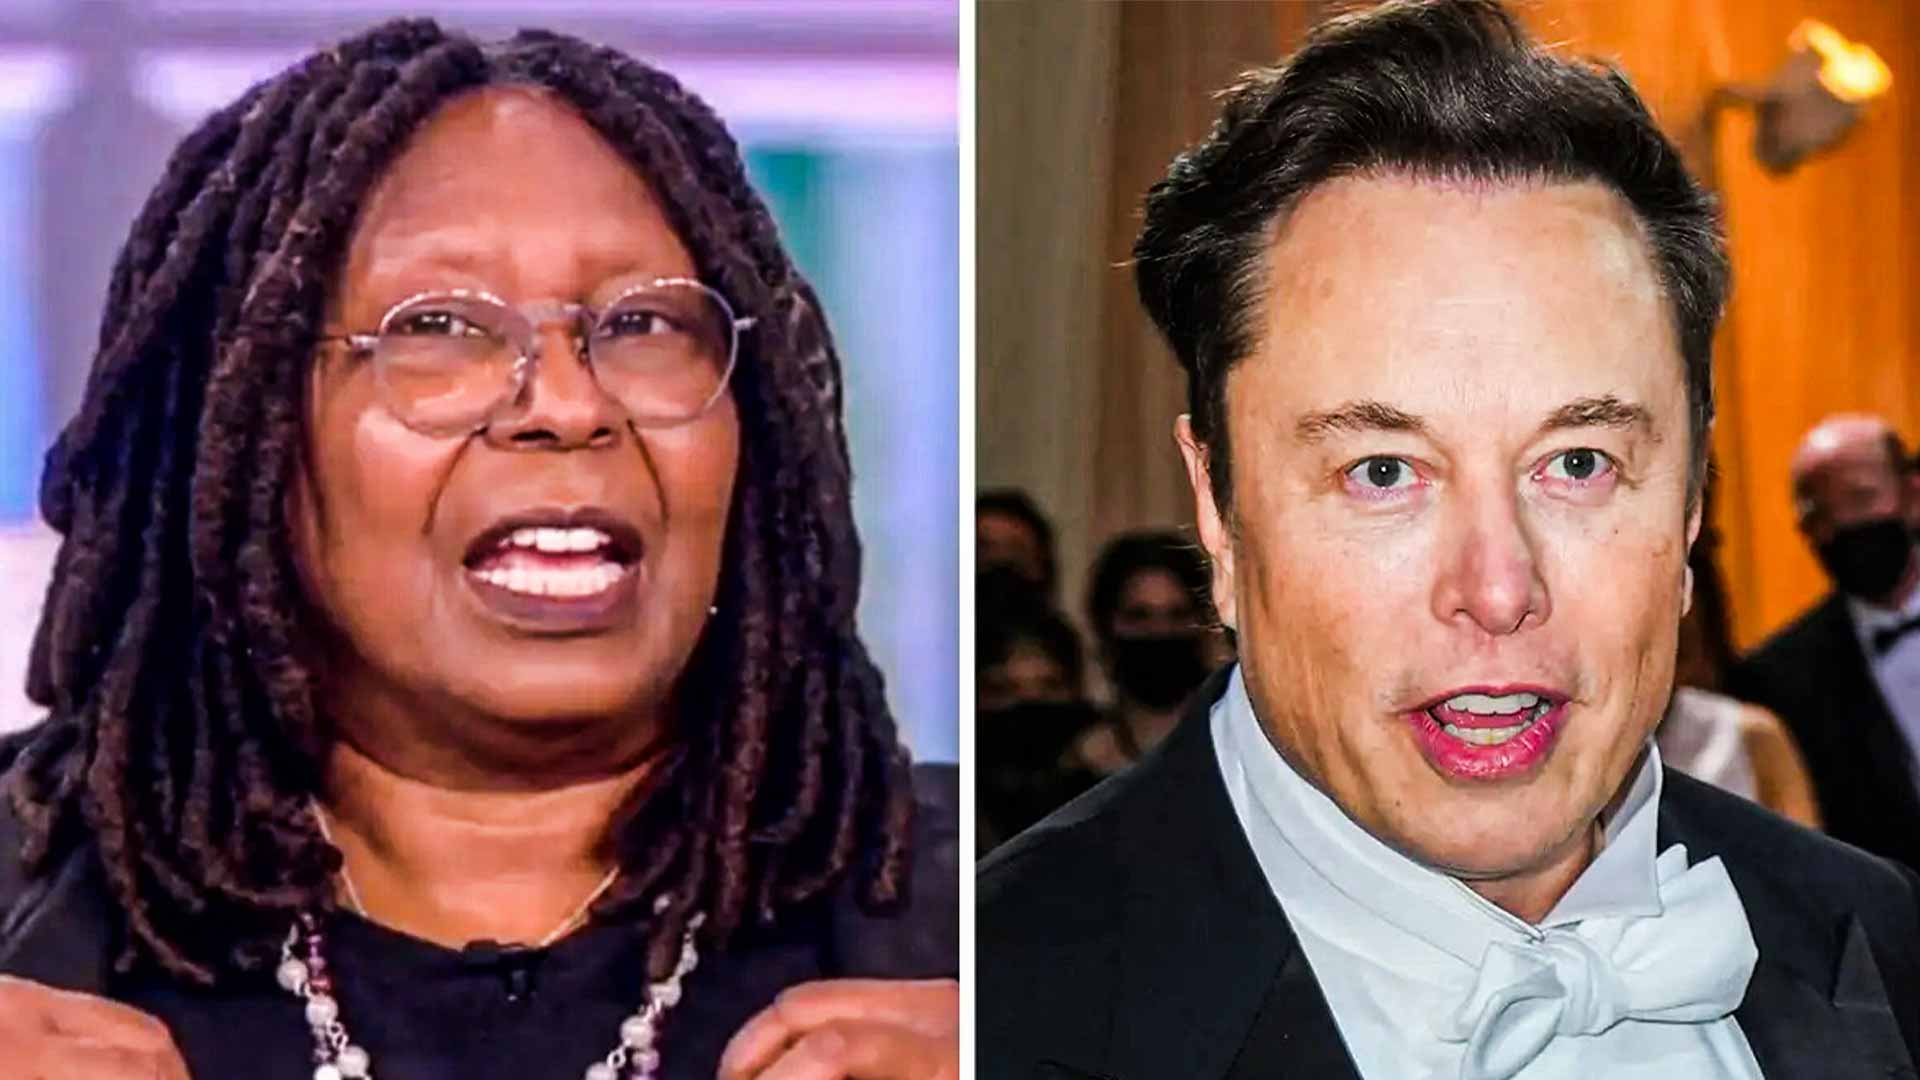 https://americawebstories.com/viral-elon-musk-challenges-whoopi-goldberg-to-a-cage-fight-match-shifting-focus-from-zuck/